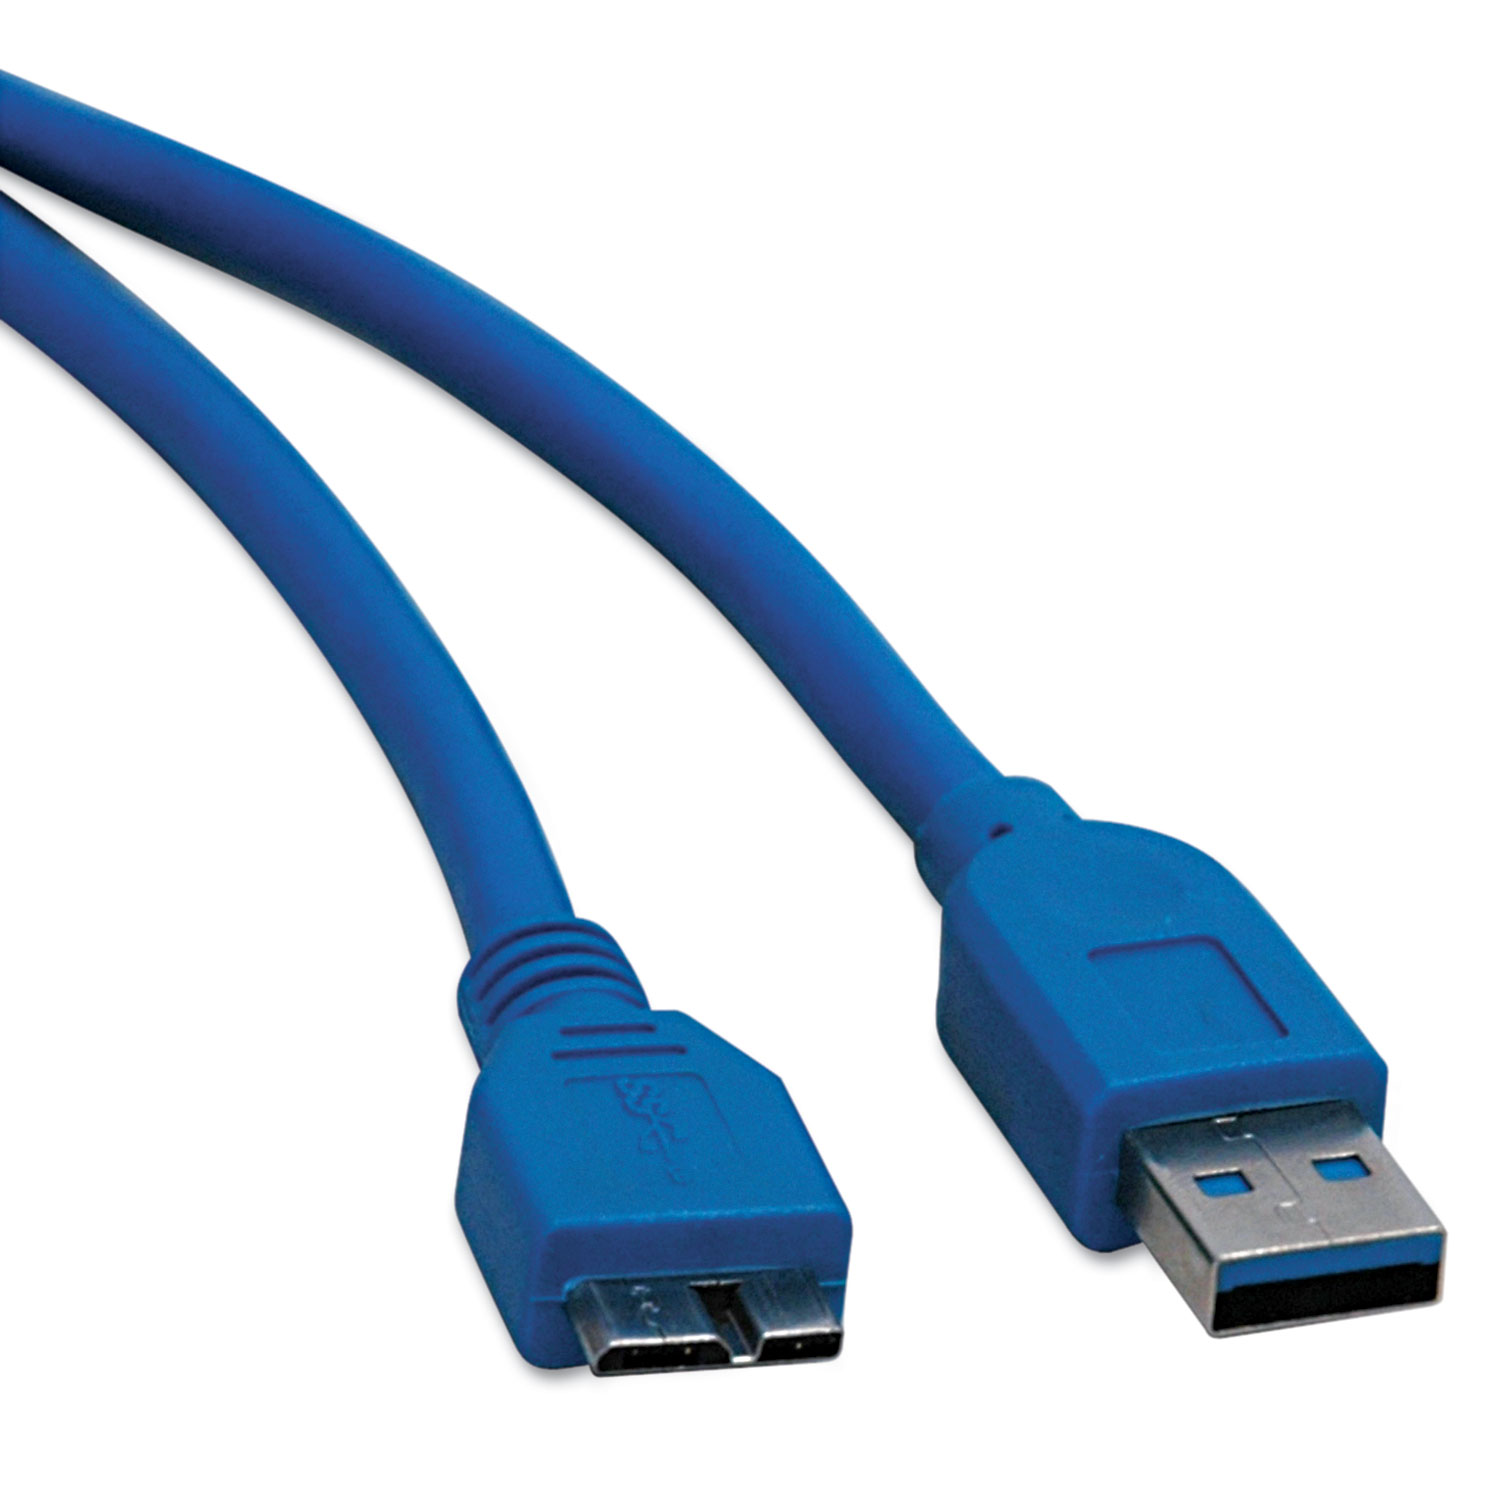 USB 3.0 SuperSpeed Device Cable (A to Micro-B M/M), 3 ft., Blue